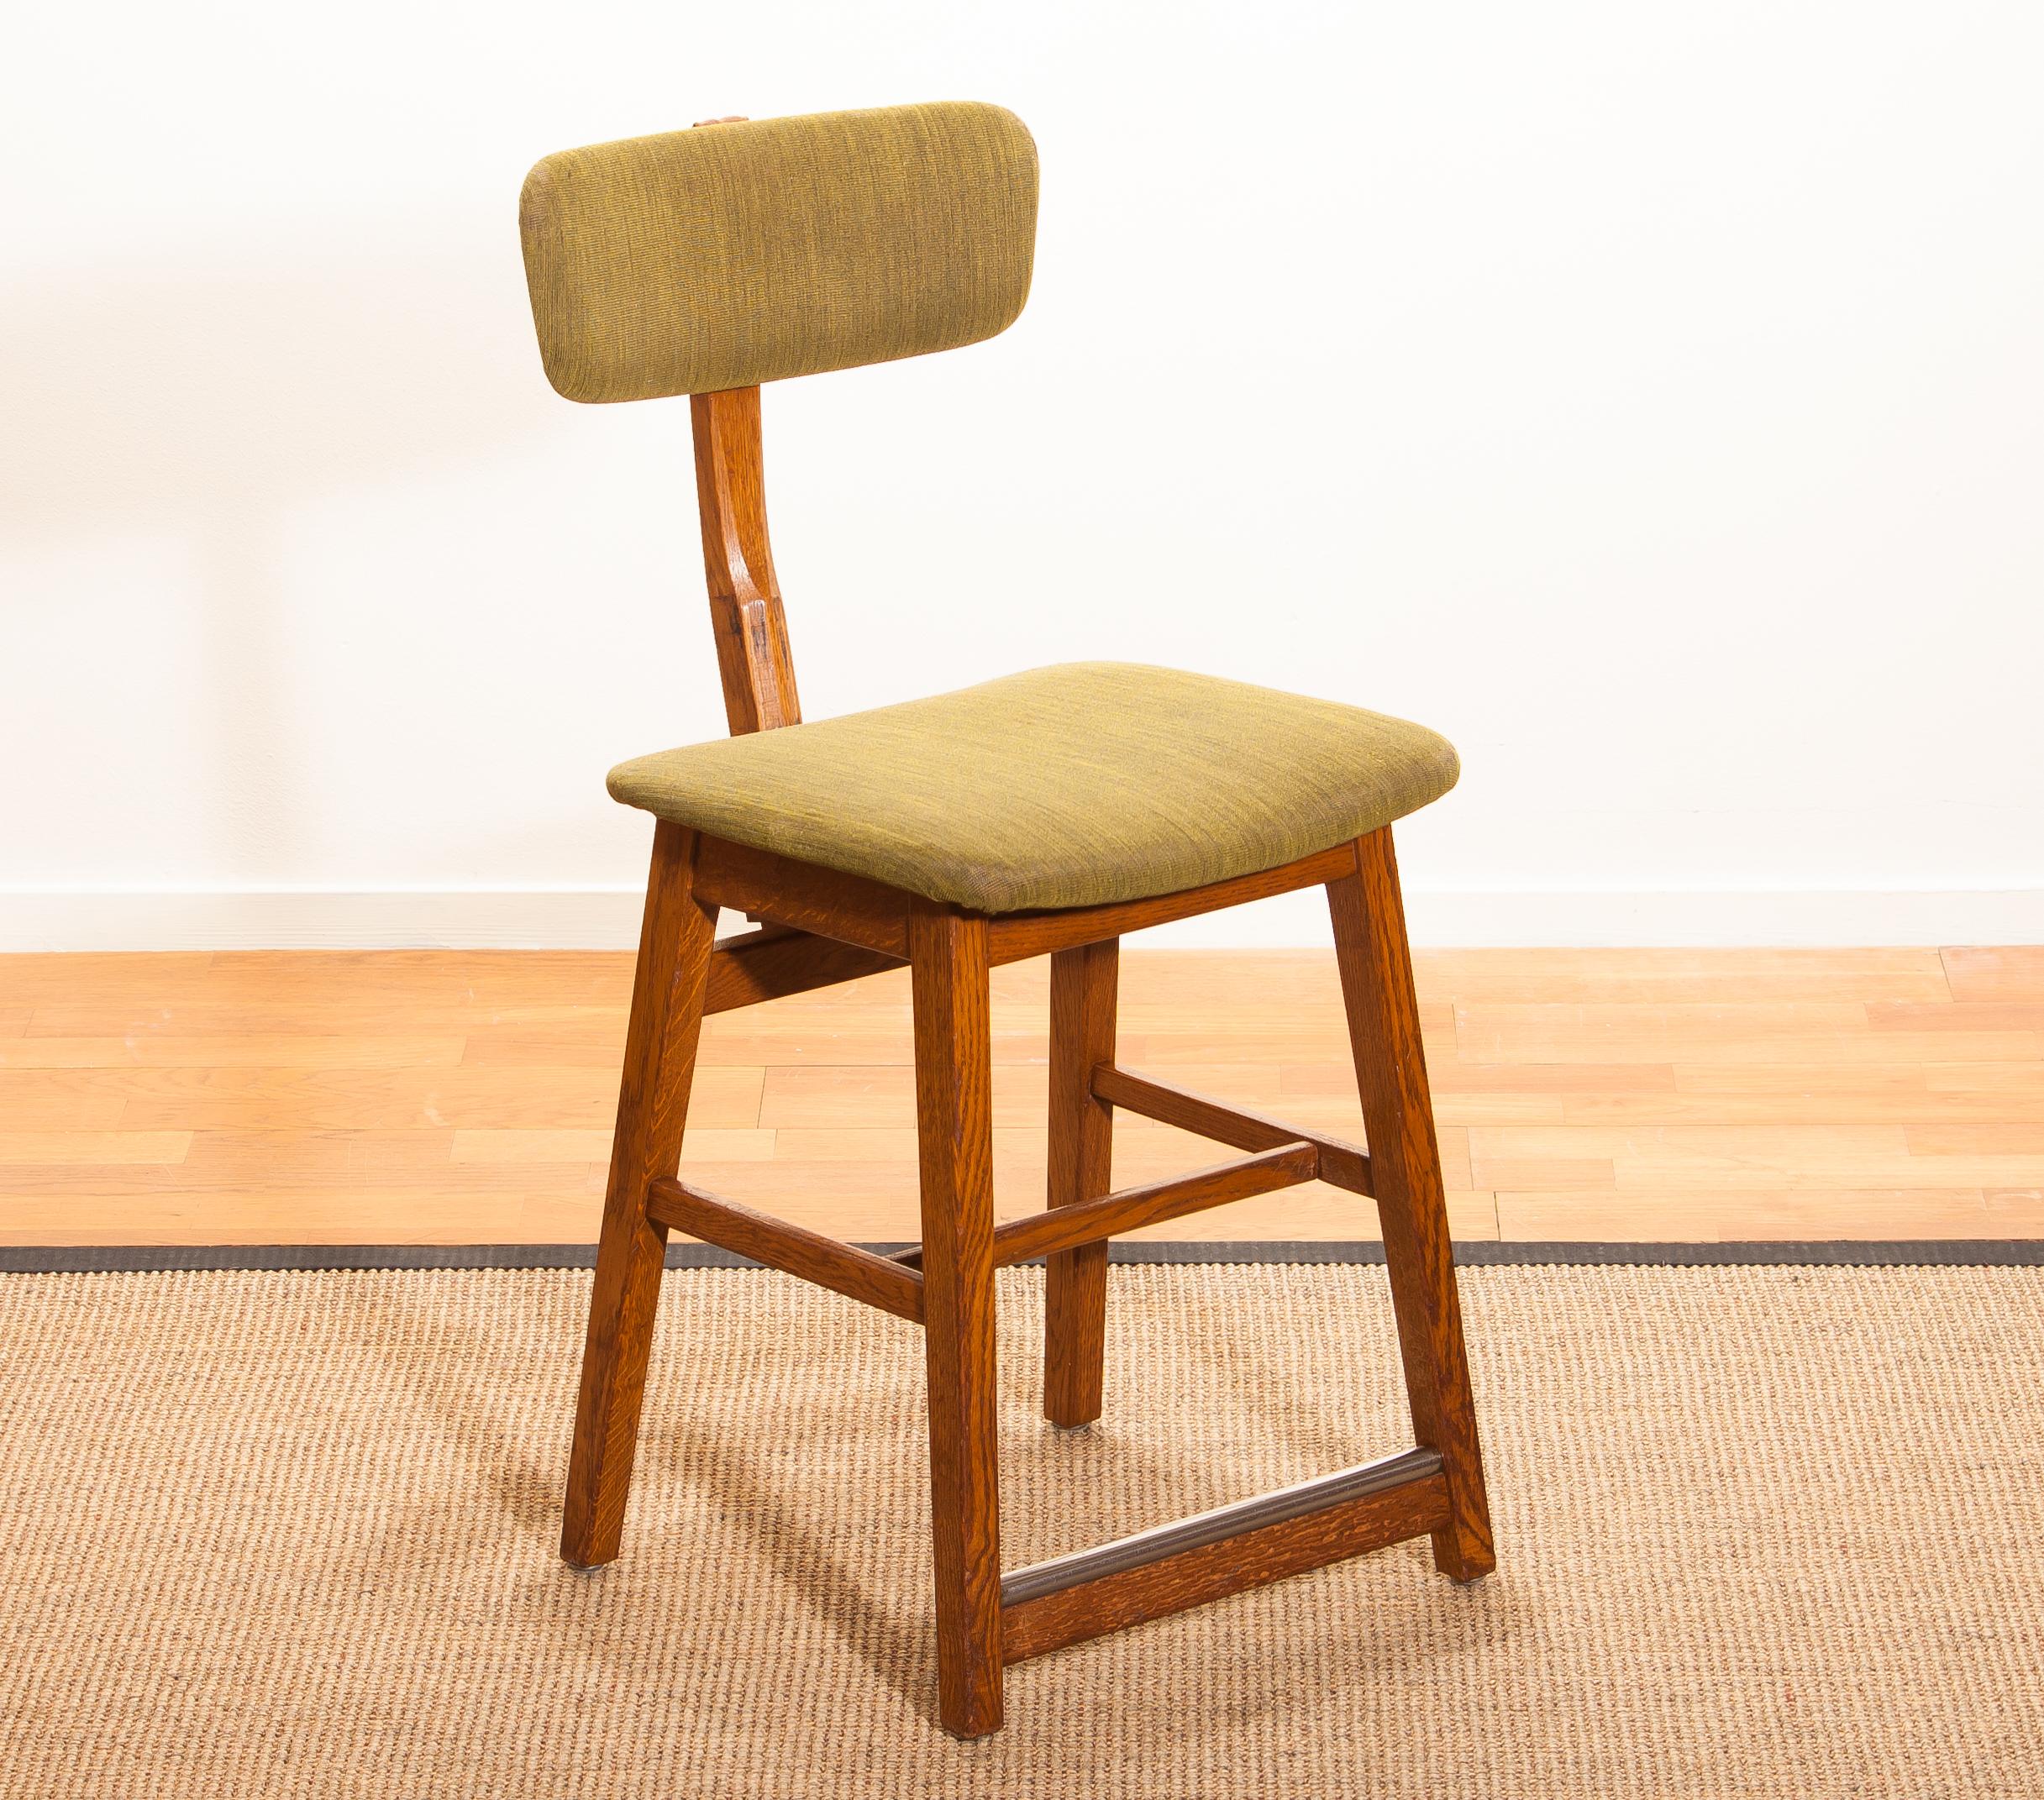 Mid-20th Century 1960s, Teak and Wool Desk Chair by Âtvidabergs, Sweden